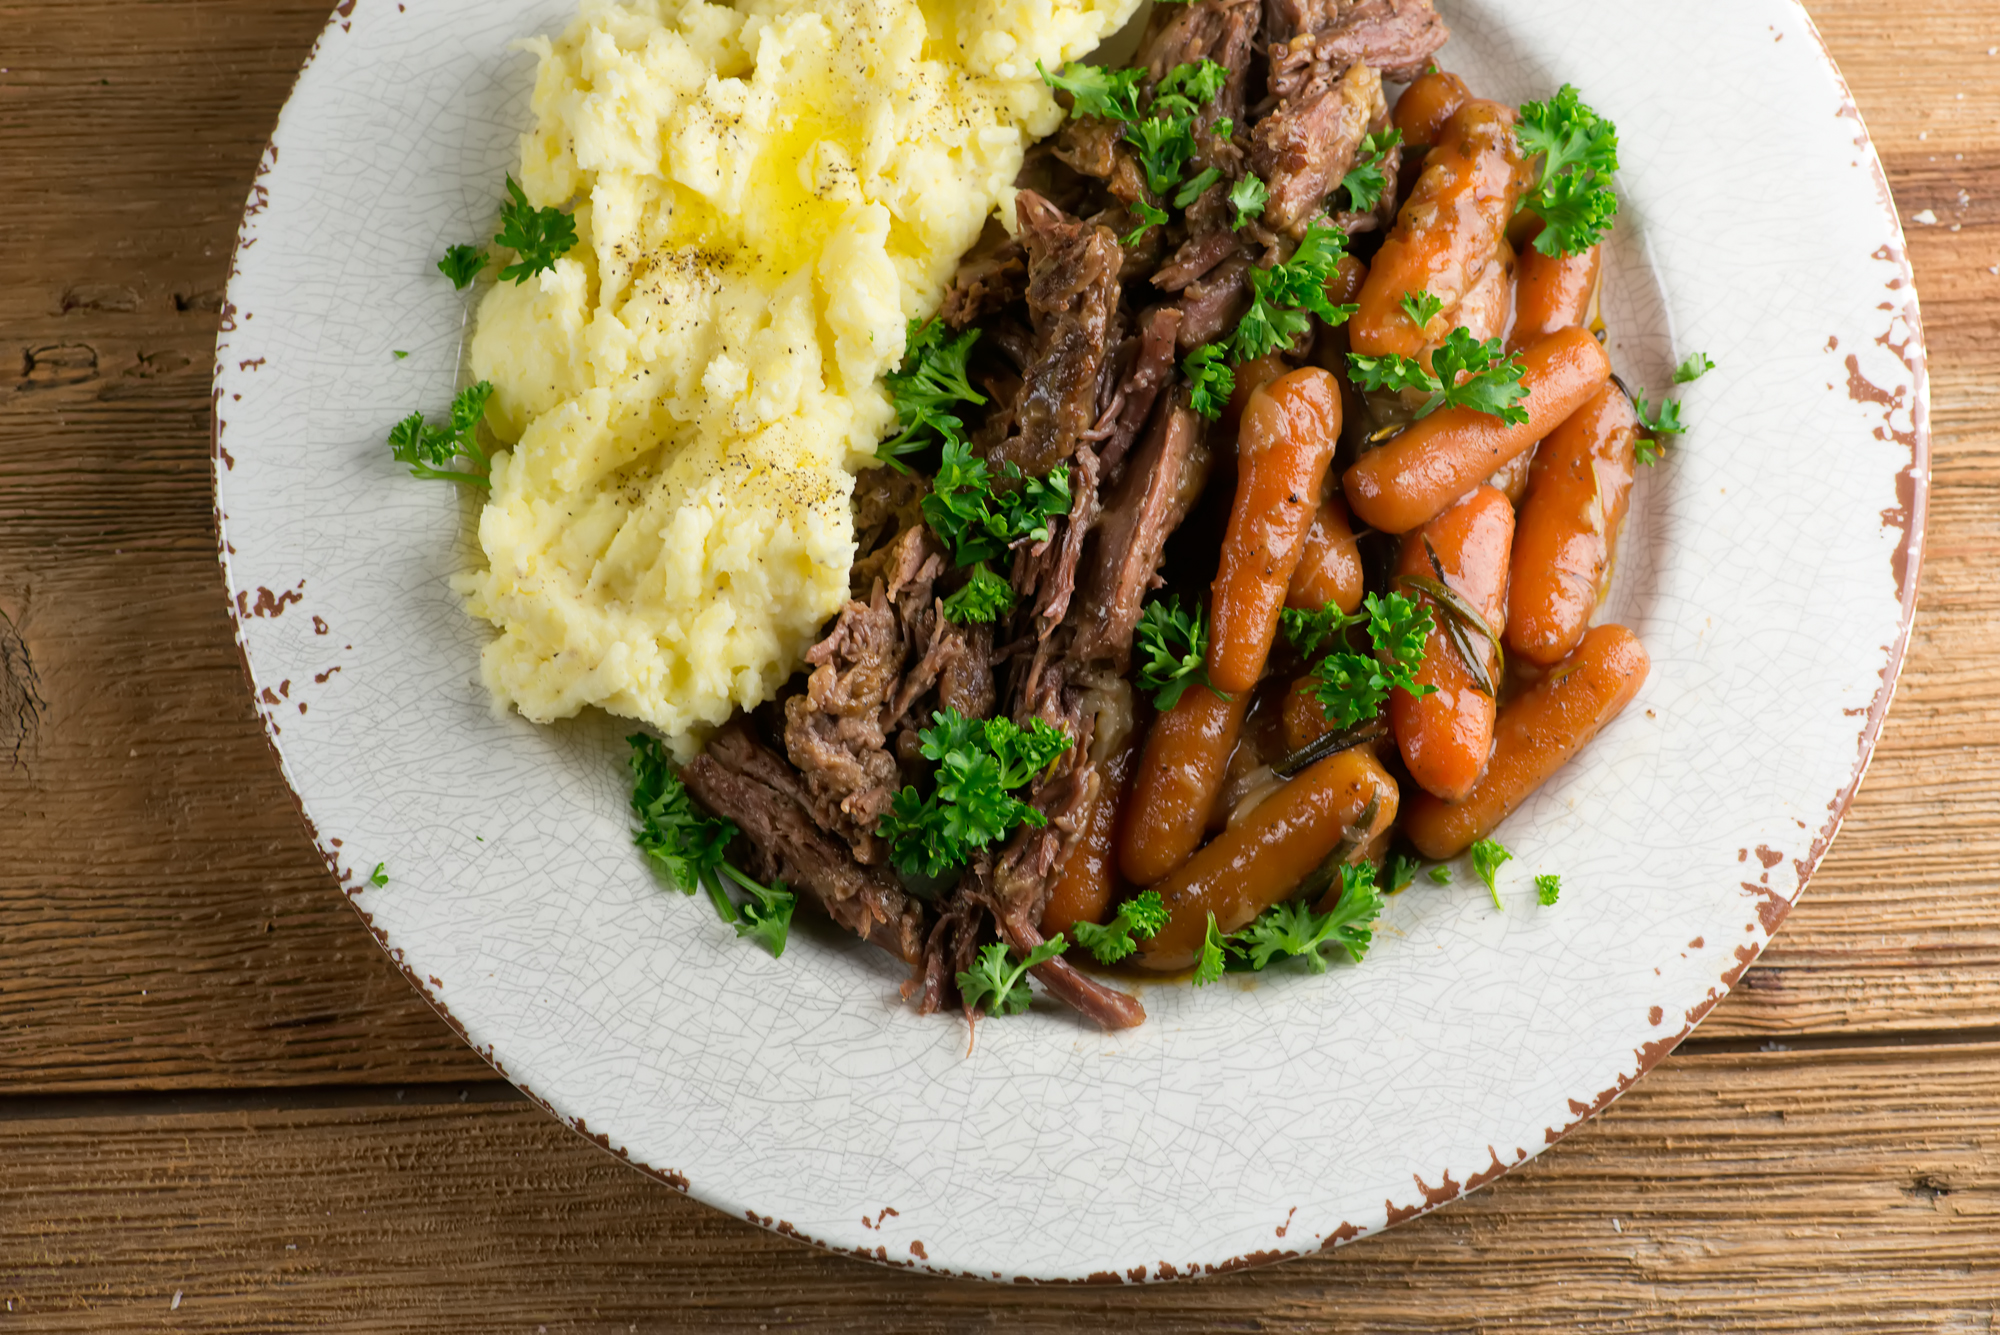 Shredded pot roast on a plate with mashed potatoes.